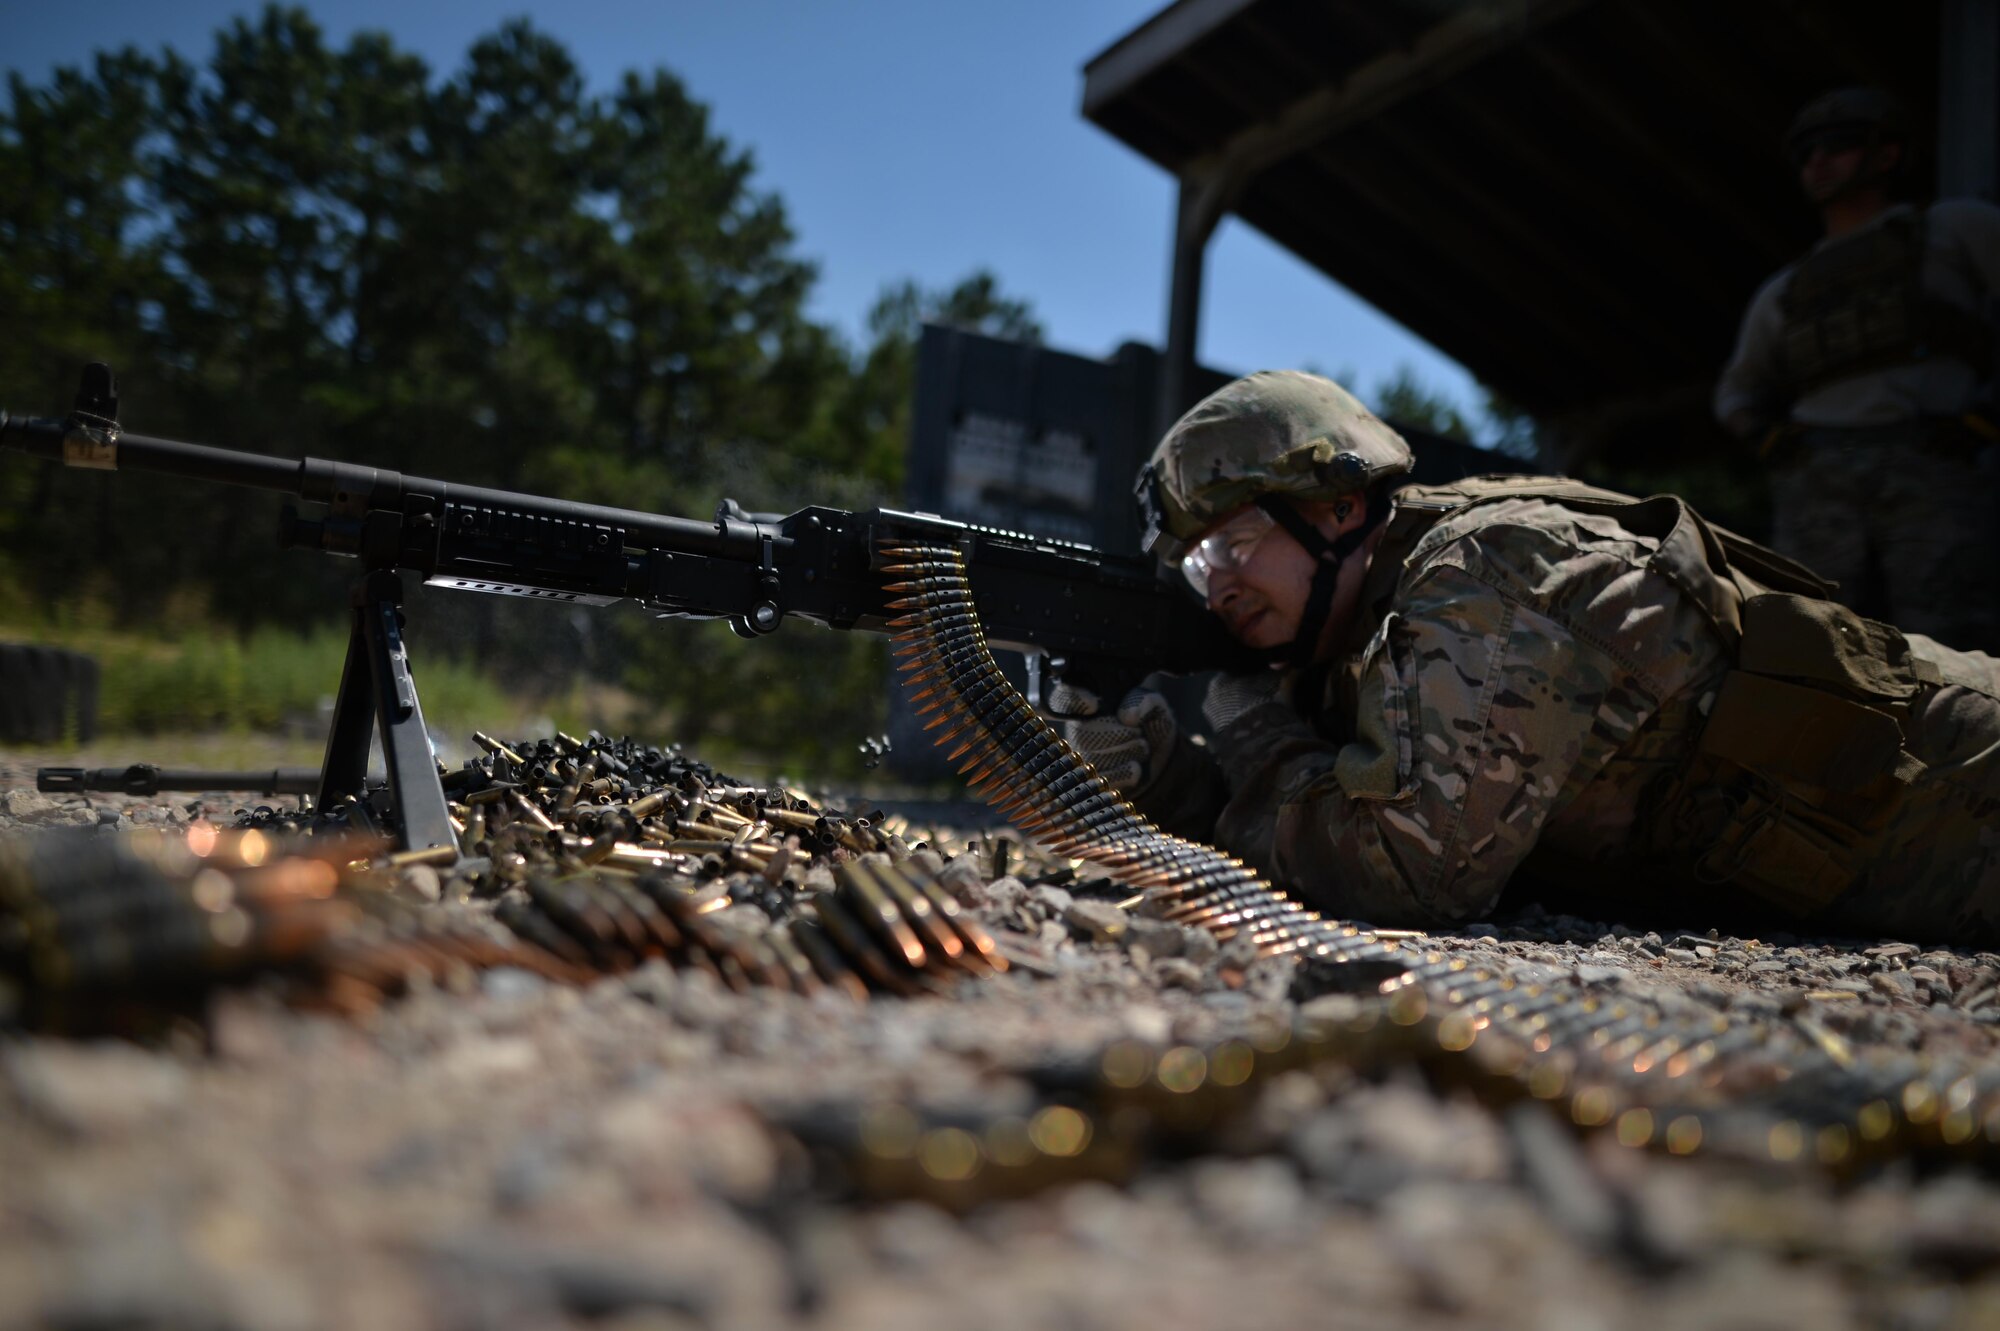 Staff Sgt. Robert Converse, a member of the 106th Rescue Wing Security Forces Squadron, fires a M240 machine gun during a training event at the Suffolk County Range in Westhampton Beach, N.Y., Aug. 24, 2016. Security forces members regularly train on the use and upkeep of these weapons, as well as the M249 squad automatic weapon, M4 carbine and M9 pistol. (U.S. Air National Guard photo/Staff Sgt. Christopher S. Muncy)